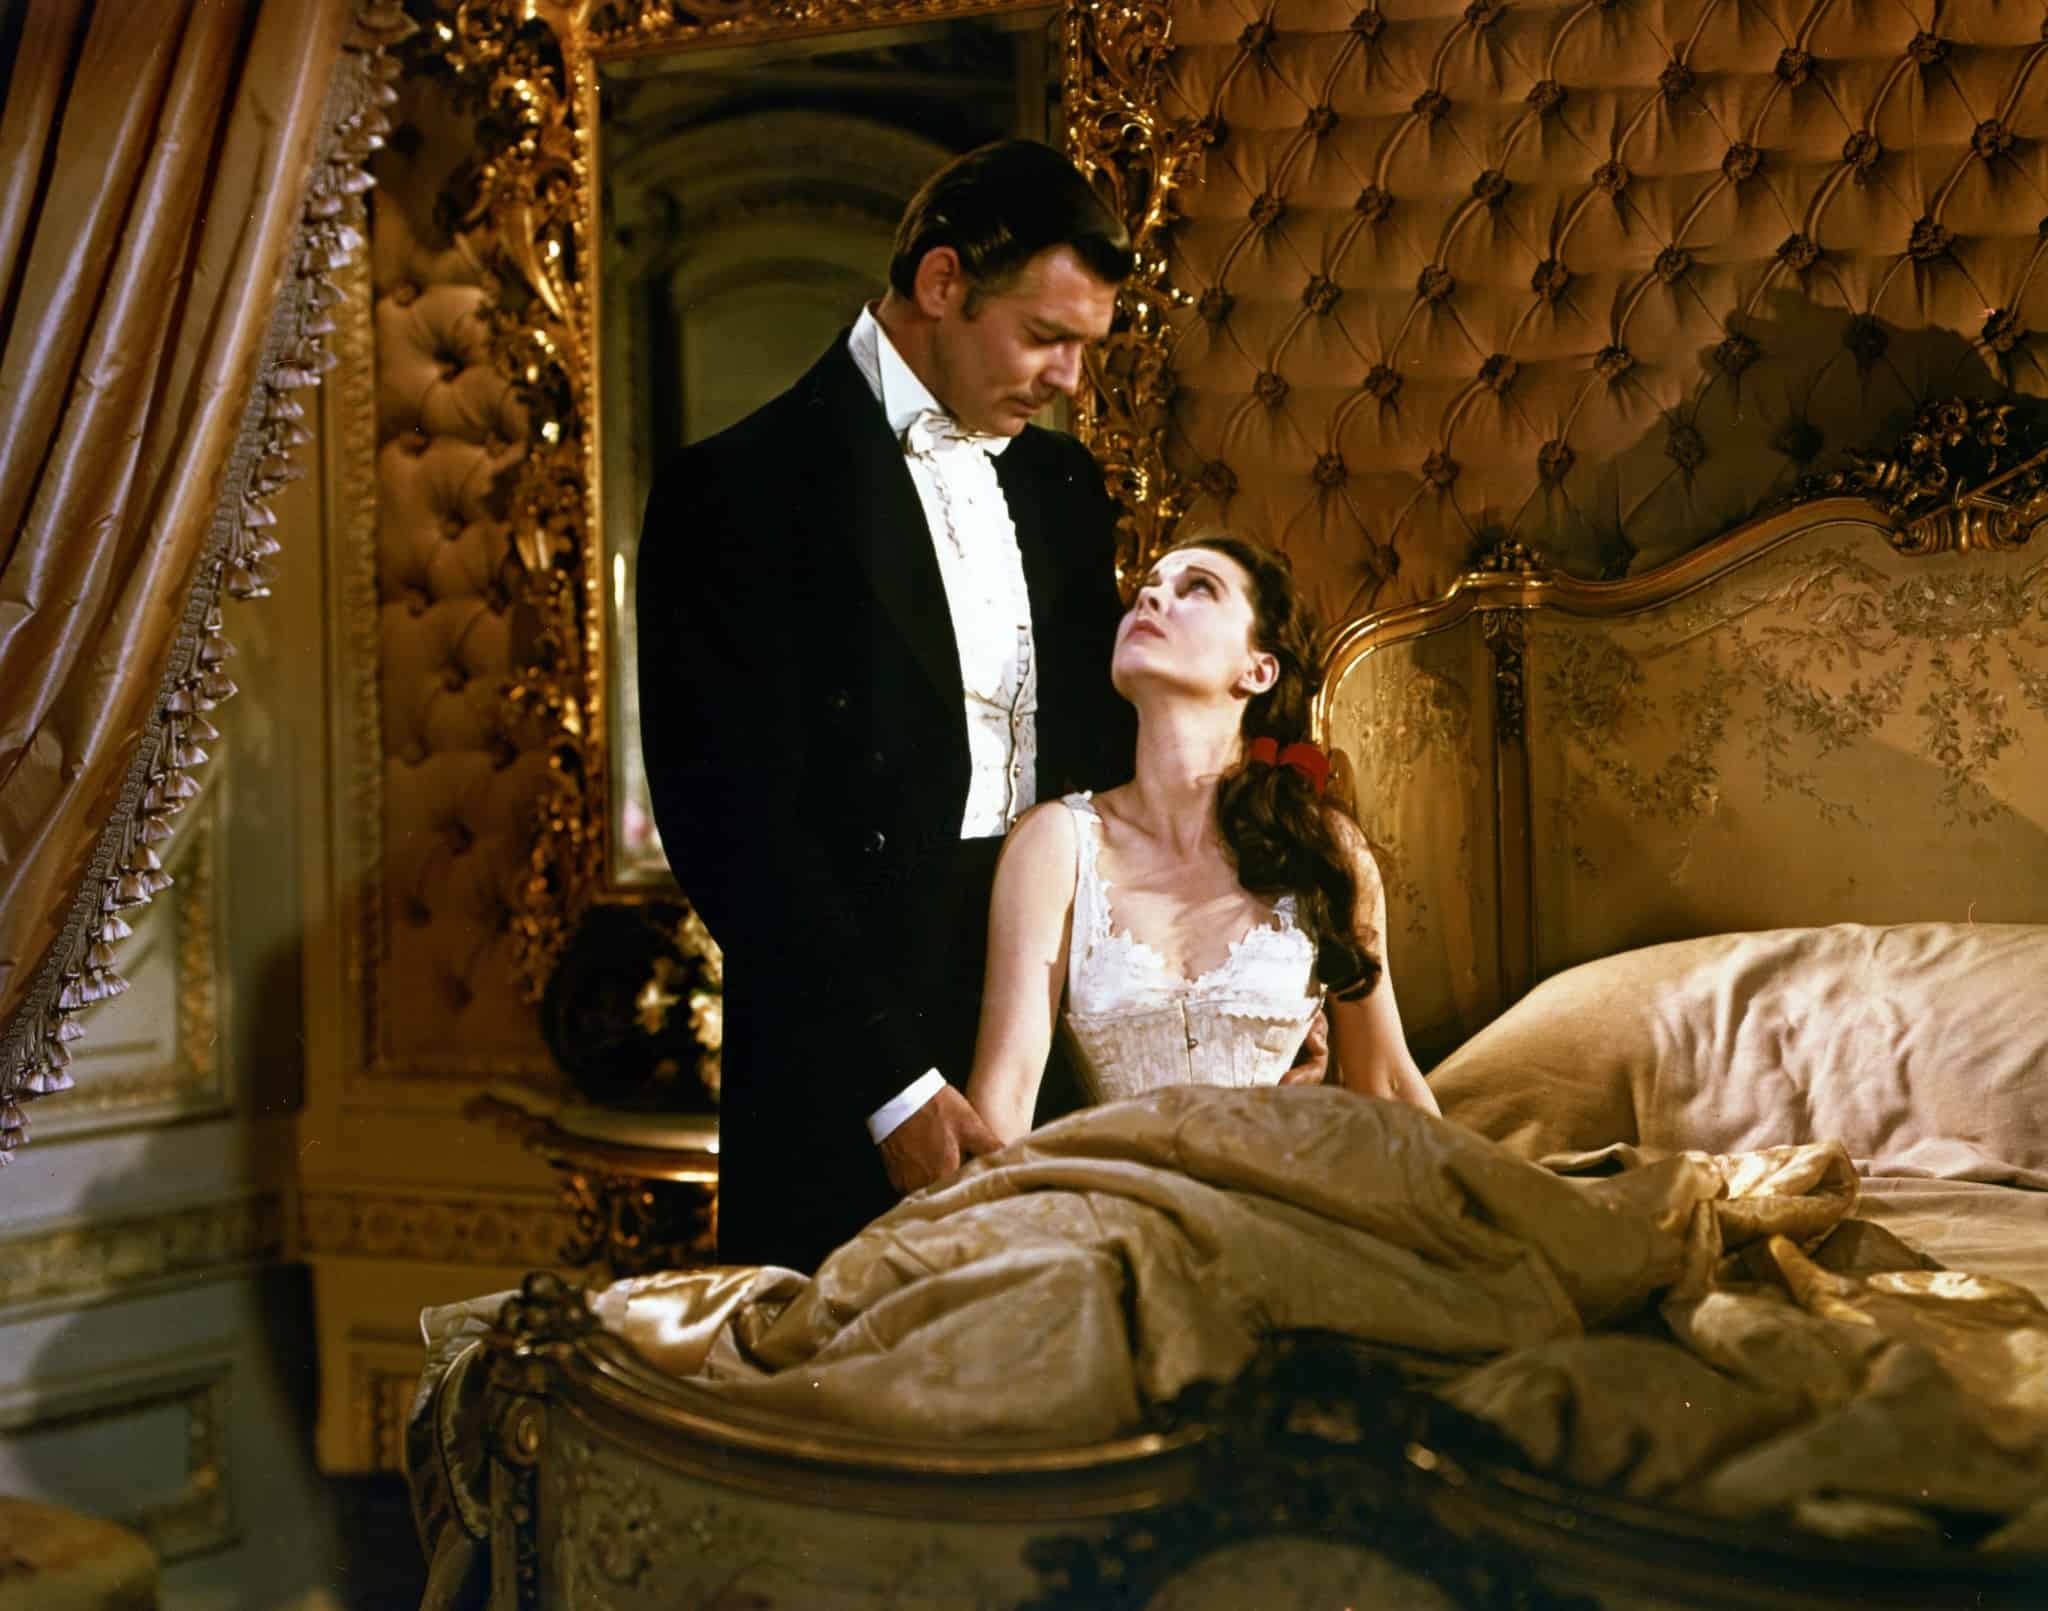 Clark Gable looking down on Vivien Leigh in bed in this image from Selznick International Pictures.